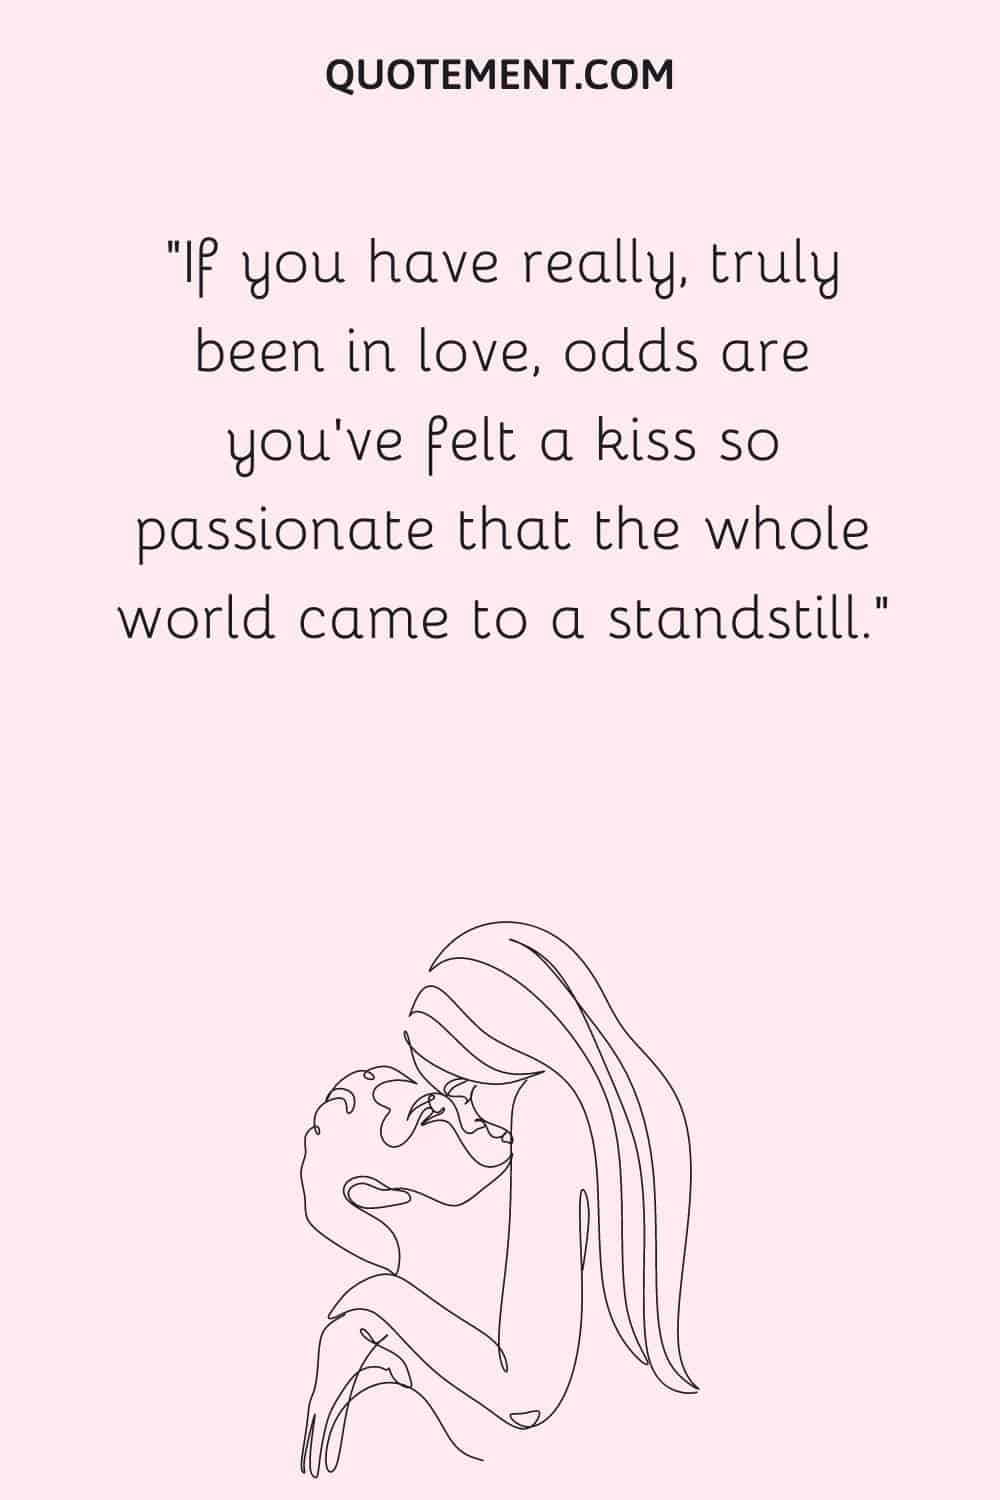 If you have really, truly been in love, odds are you've felt a kiss so passionate that the whole world came to a standstill.